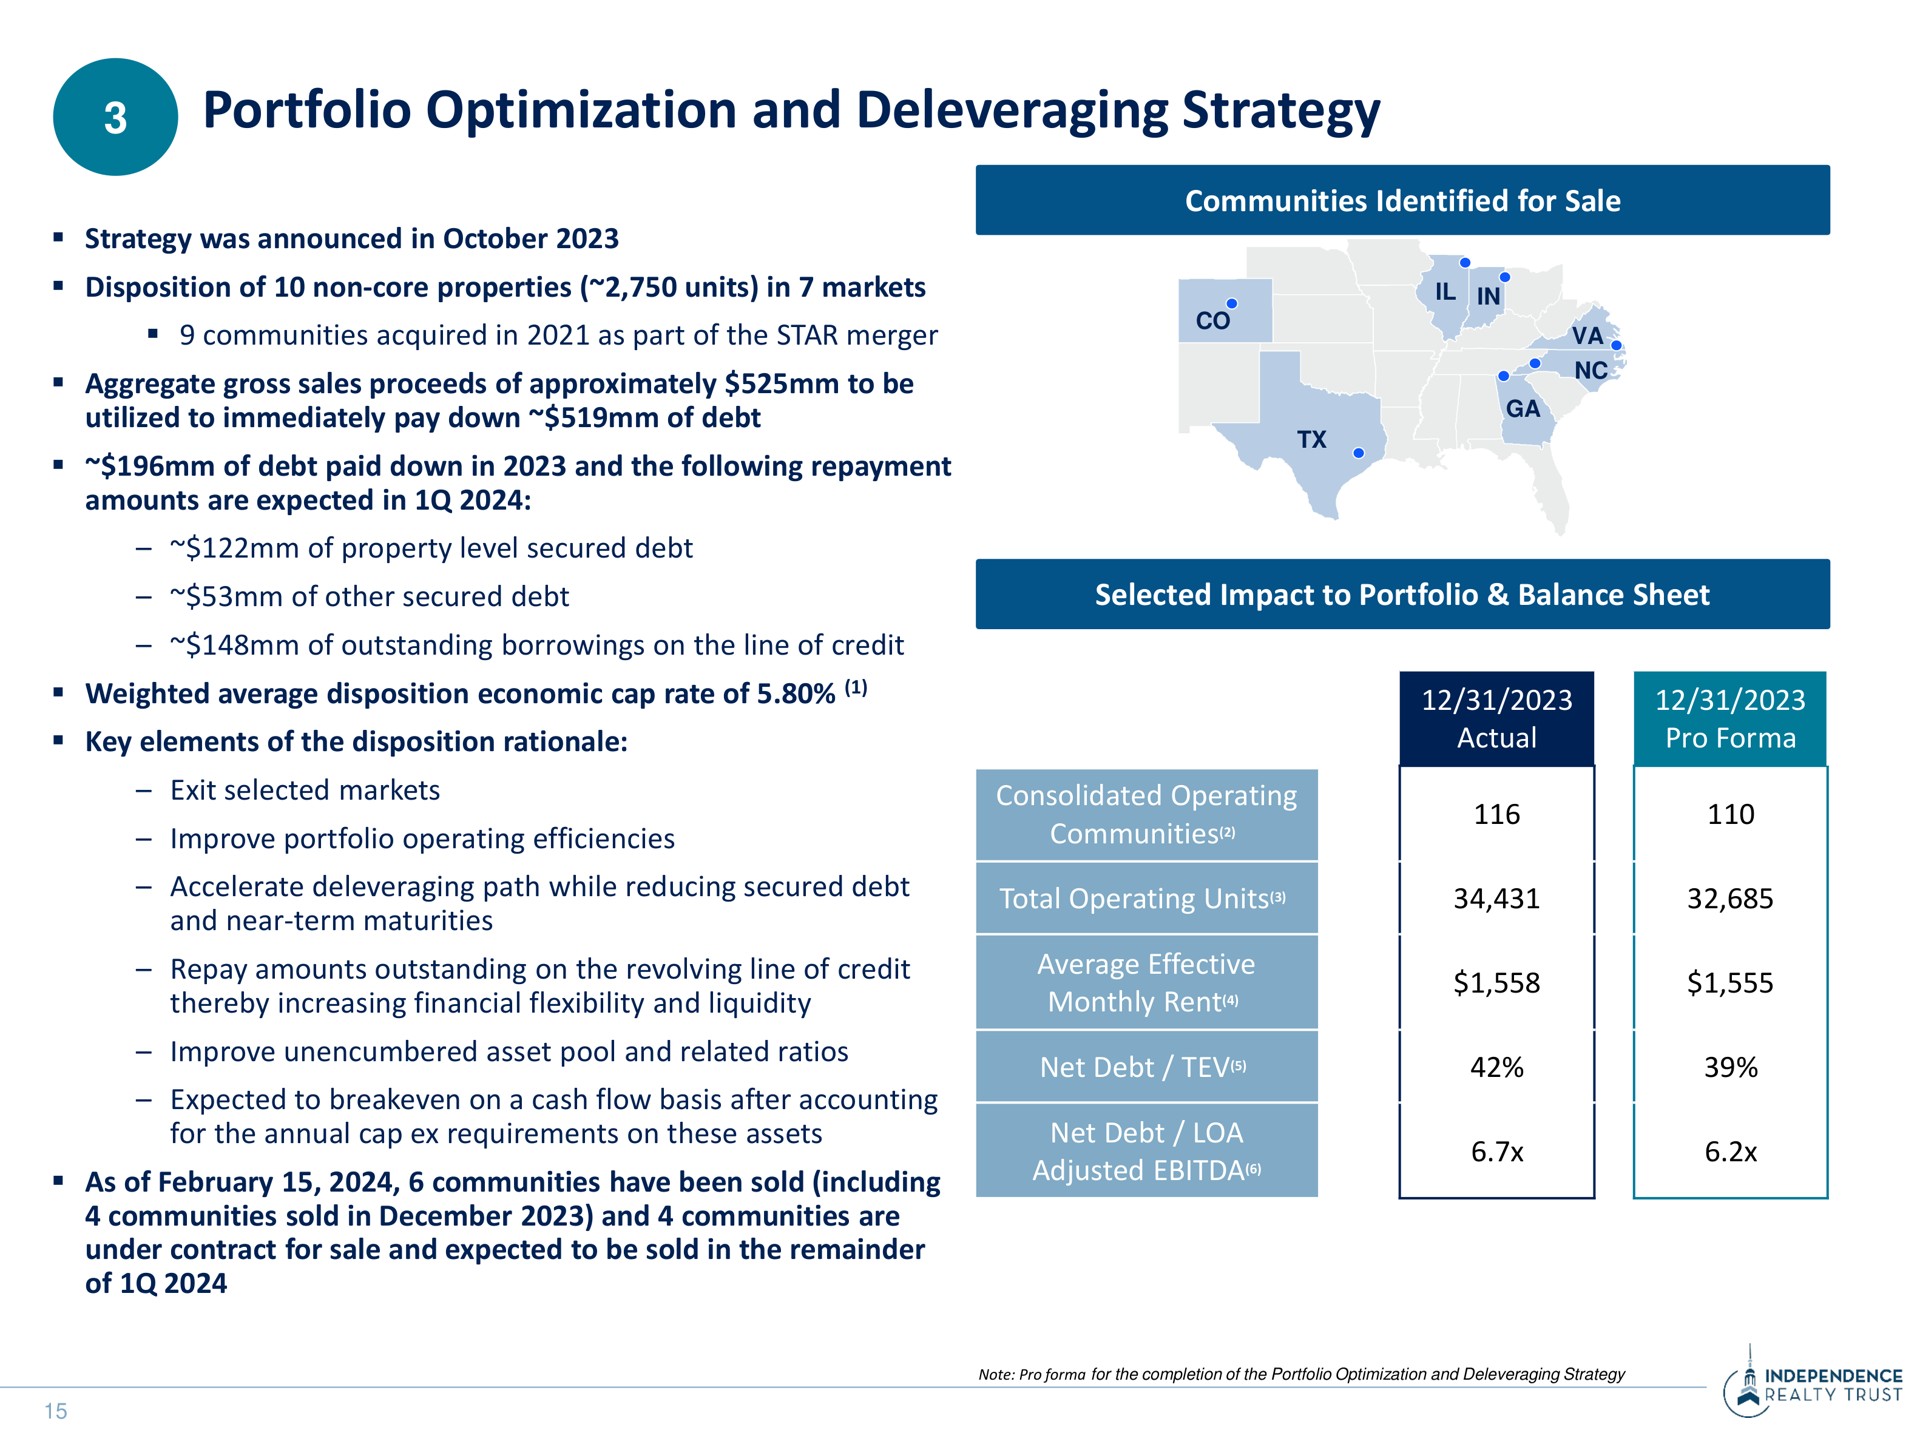 portfolio optimization and strategy exit selected markets consolidated operating | Independence Realty Trust